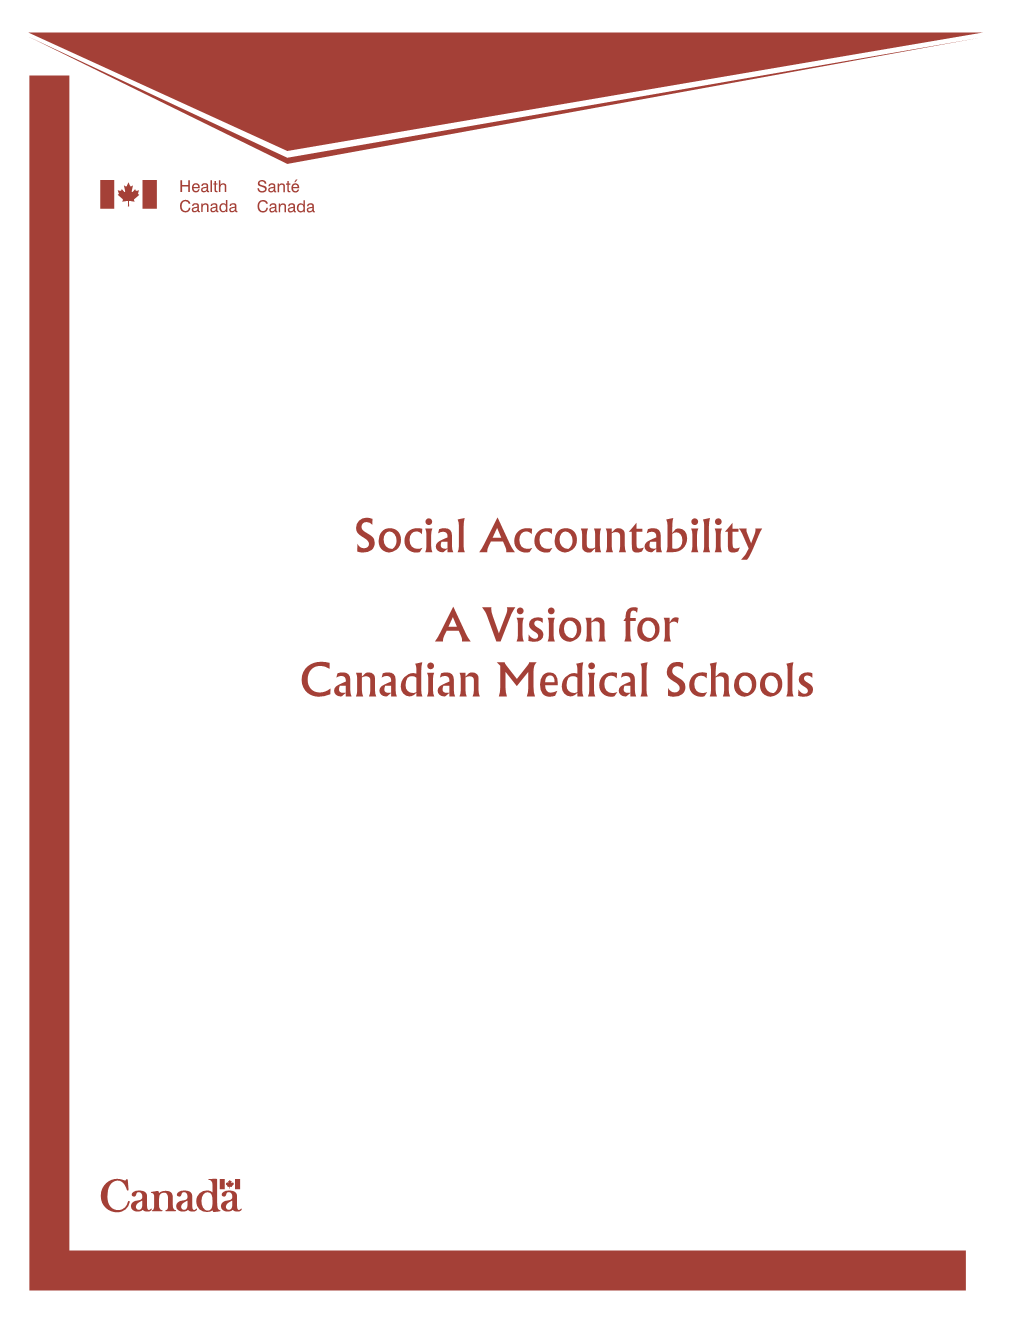 A Vision for Canadian Medical Schools Social Accountability